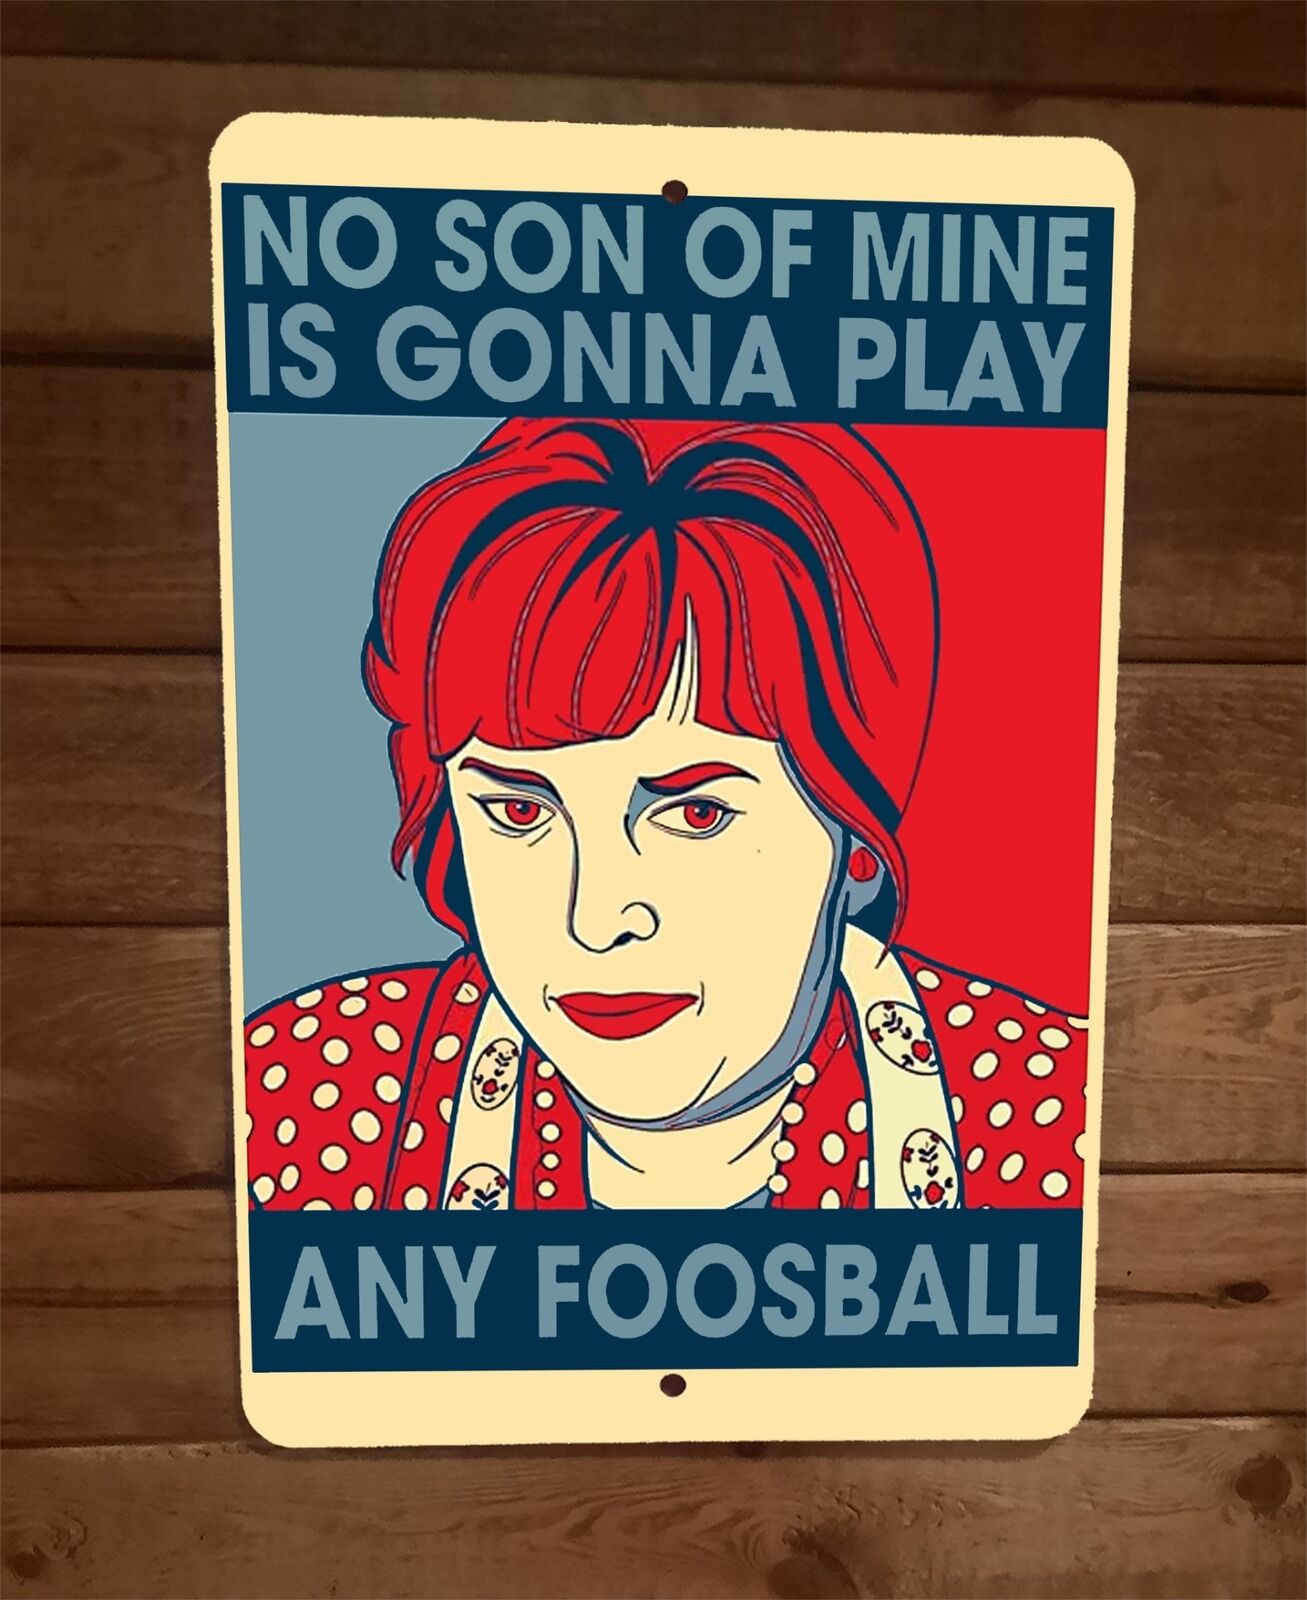 No Son of Mine is Gonna Play Any Foosball 8x12 Metal Wall Sign